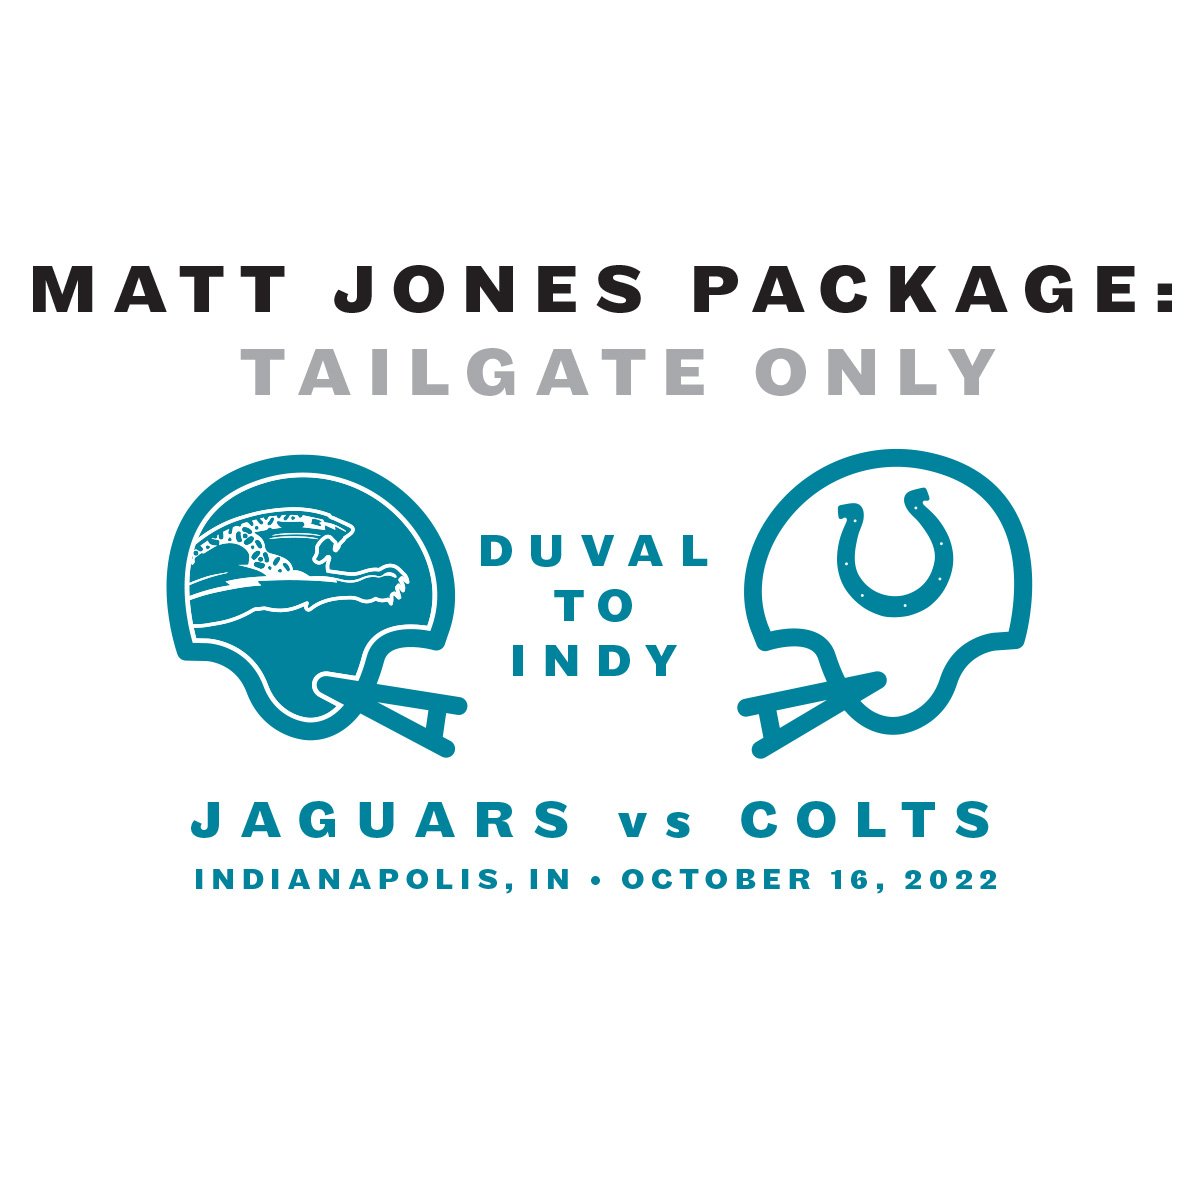 Image of The Matt Jones: Pregame Party access only - DUVAL to INDY